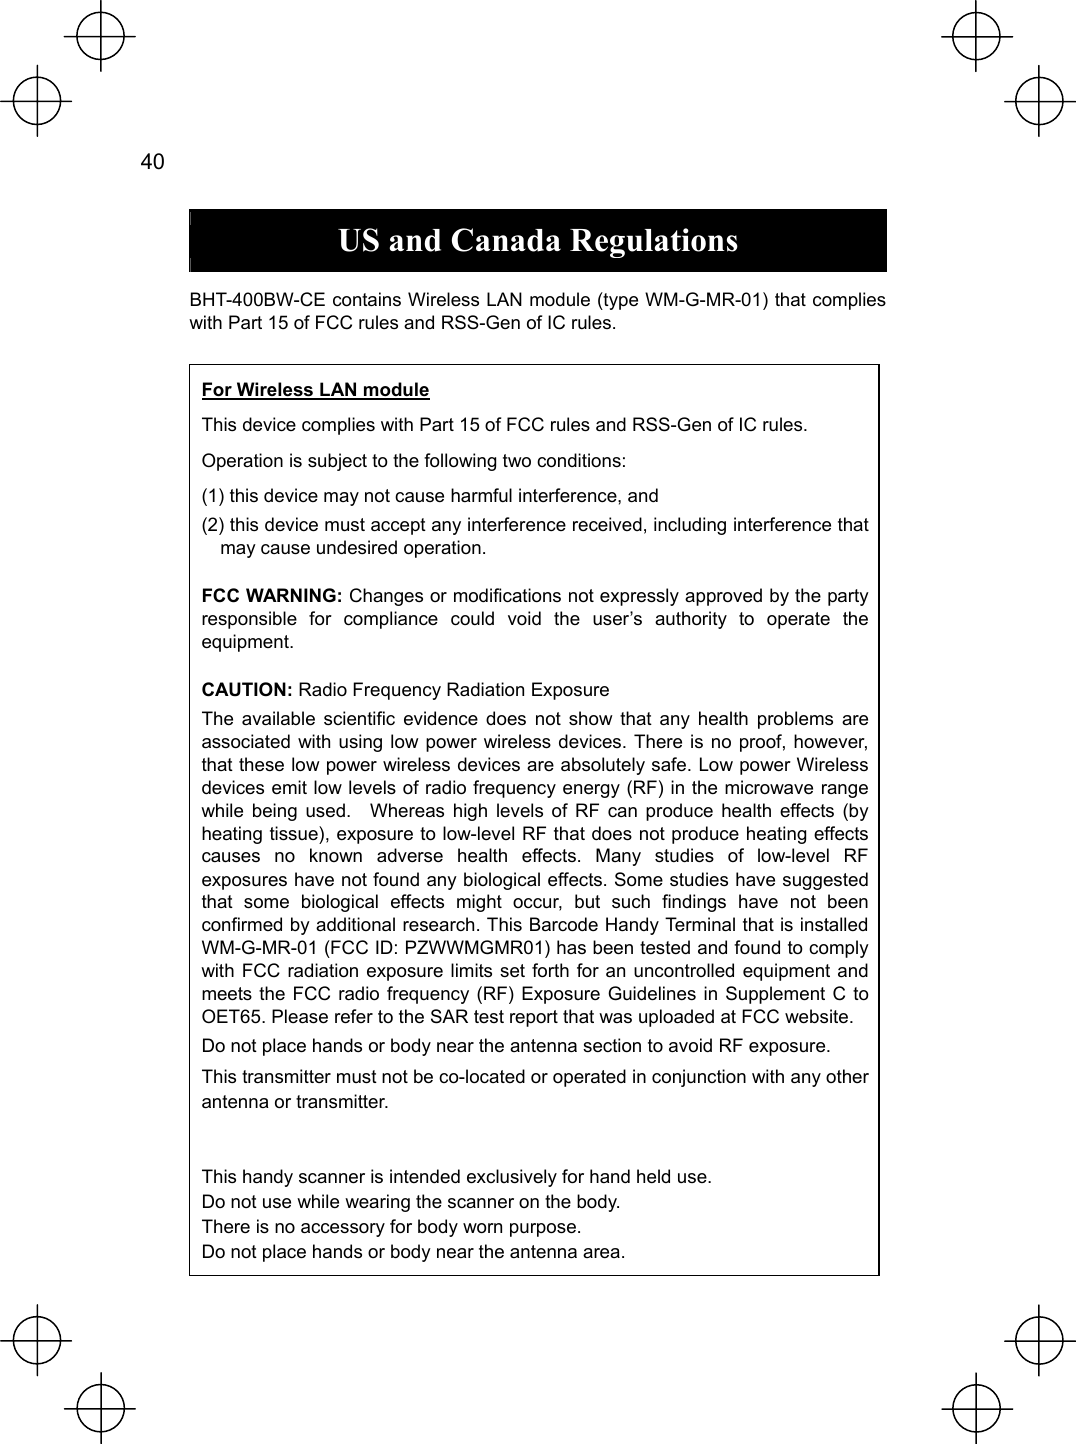  40   US and Canada Regulations  BHT-400BW-CE contains Wireless LAN module (type WM-G-MR-01) that complies with Part 15 of FCC rules and RSS-Gen of IC rules.                       For Wireless LAN module This device complies with Part 15 of FCC rules and RSS-Gen of IC rules. Operation is subject to the following two conditions: (1) this device may not cause harmful interference, and (2) this device must accept any interference received, including interference that may cause undesired operation. FCC WARNING: Changes or modifications not expressly approved by the party responsible for compliance could void the user’s authority to operate the equipment. CAUTION: Radio Frequency Radiation Exposure The available scientific evidence does not show that any health problems are associated with using low power wireless devices. There is no proof, however, that these low power wireless devices are absolutely safe. Low power Wireless devices emit low levels of radio frequency energy (RF) in the microwave range while being used.  Whereas high levels of RF can produce health effects (by heating tissue), exposure to low-level RF that does not produce heating effects causes no known adverse health effects. Many studies of low-level RF exposures have not found any biological effects. Some studies have suggested that some biological effects might occur, but such findings have not been confirmed by additional research. This Barcode Handy Terminal that is installed WM-G-MR-01 (FCC ID: PZWWMGMR01) has been tested and found to comply with FCC radiation exposure limits set forth for an uncontrolled equipment and meets the FCC radio frequency (RF) Exposure Guidelines in Supplement C to OET65. Please refer to the SAR test report that was uploaded at FCC website. Do not place hands or body near the antenna section to avoid RF exposure. This transmitter must not be co-located or operated in conjunction with any other antenna or transmitter.   This handy scanner is intended exclusively for hand held use.     Do not use while wearing the scanner on the body. There is no accessory for body worn purpose.     Do not place hands or body near the antenna area. 